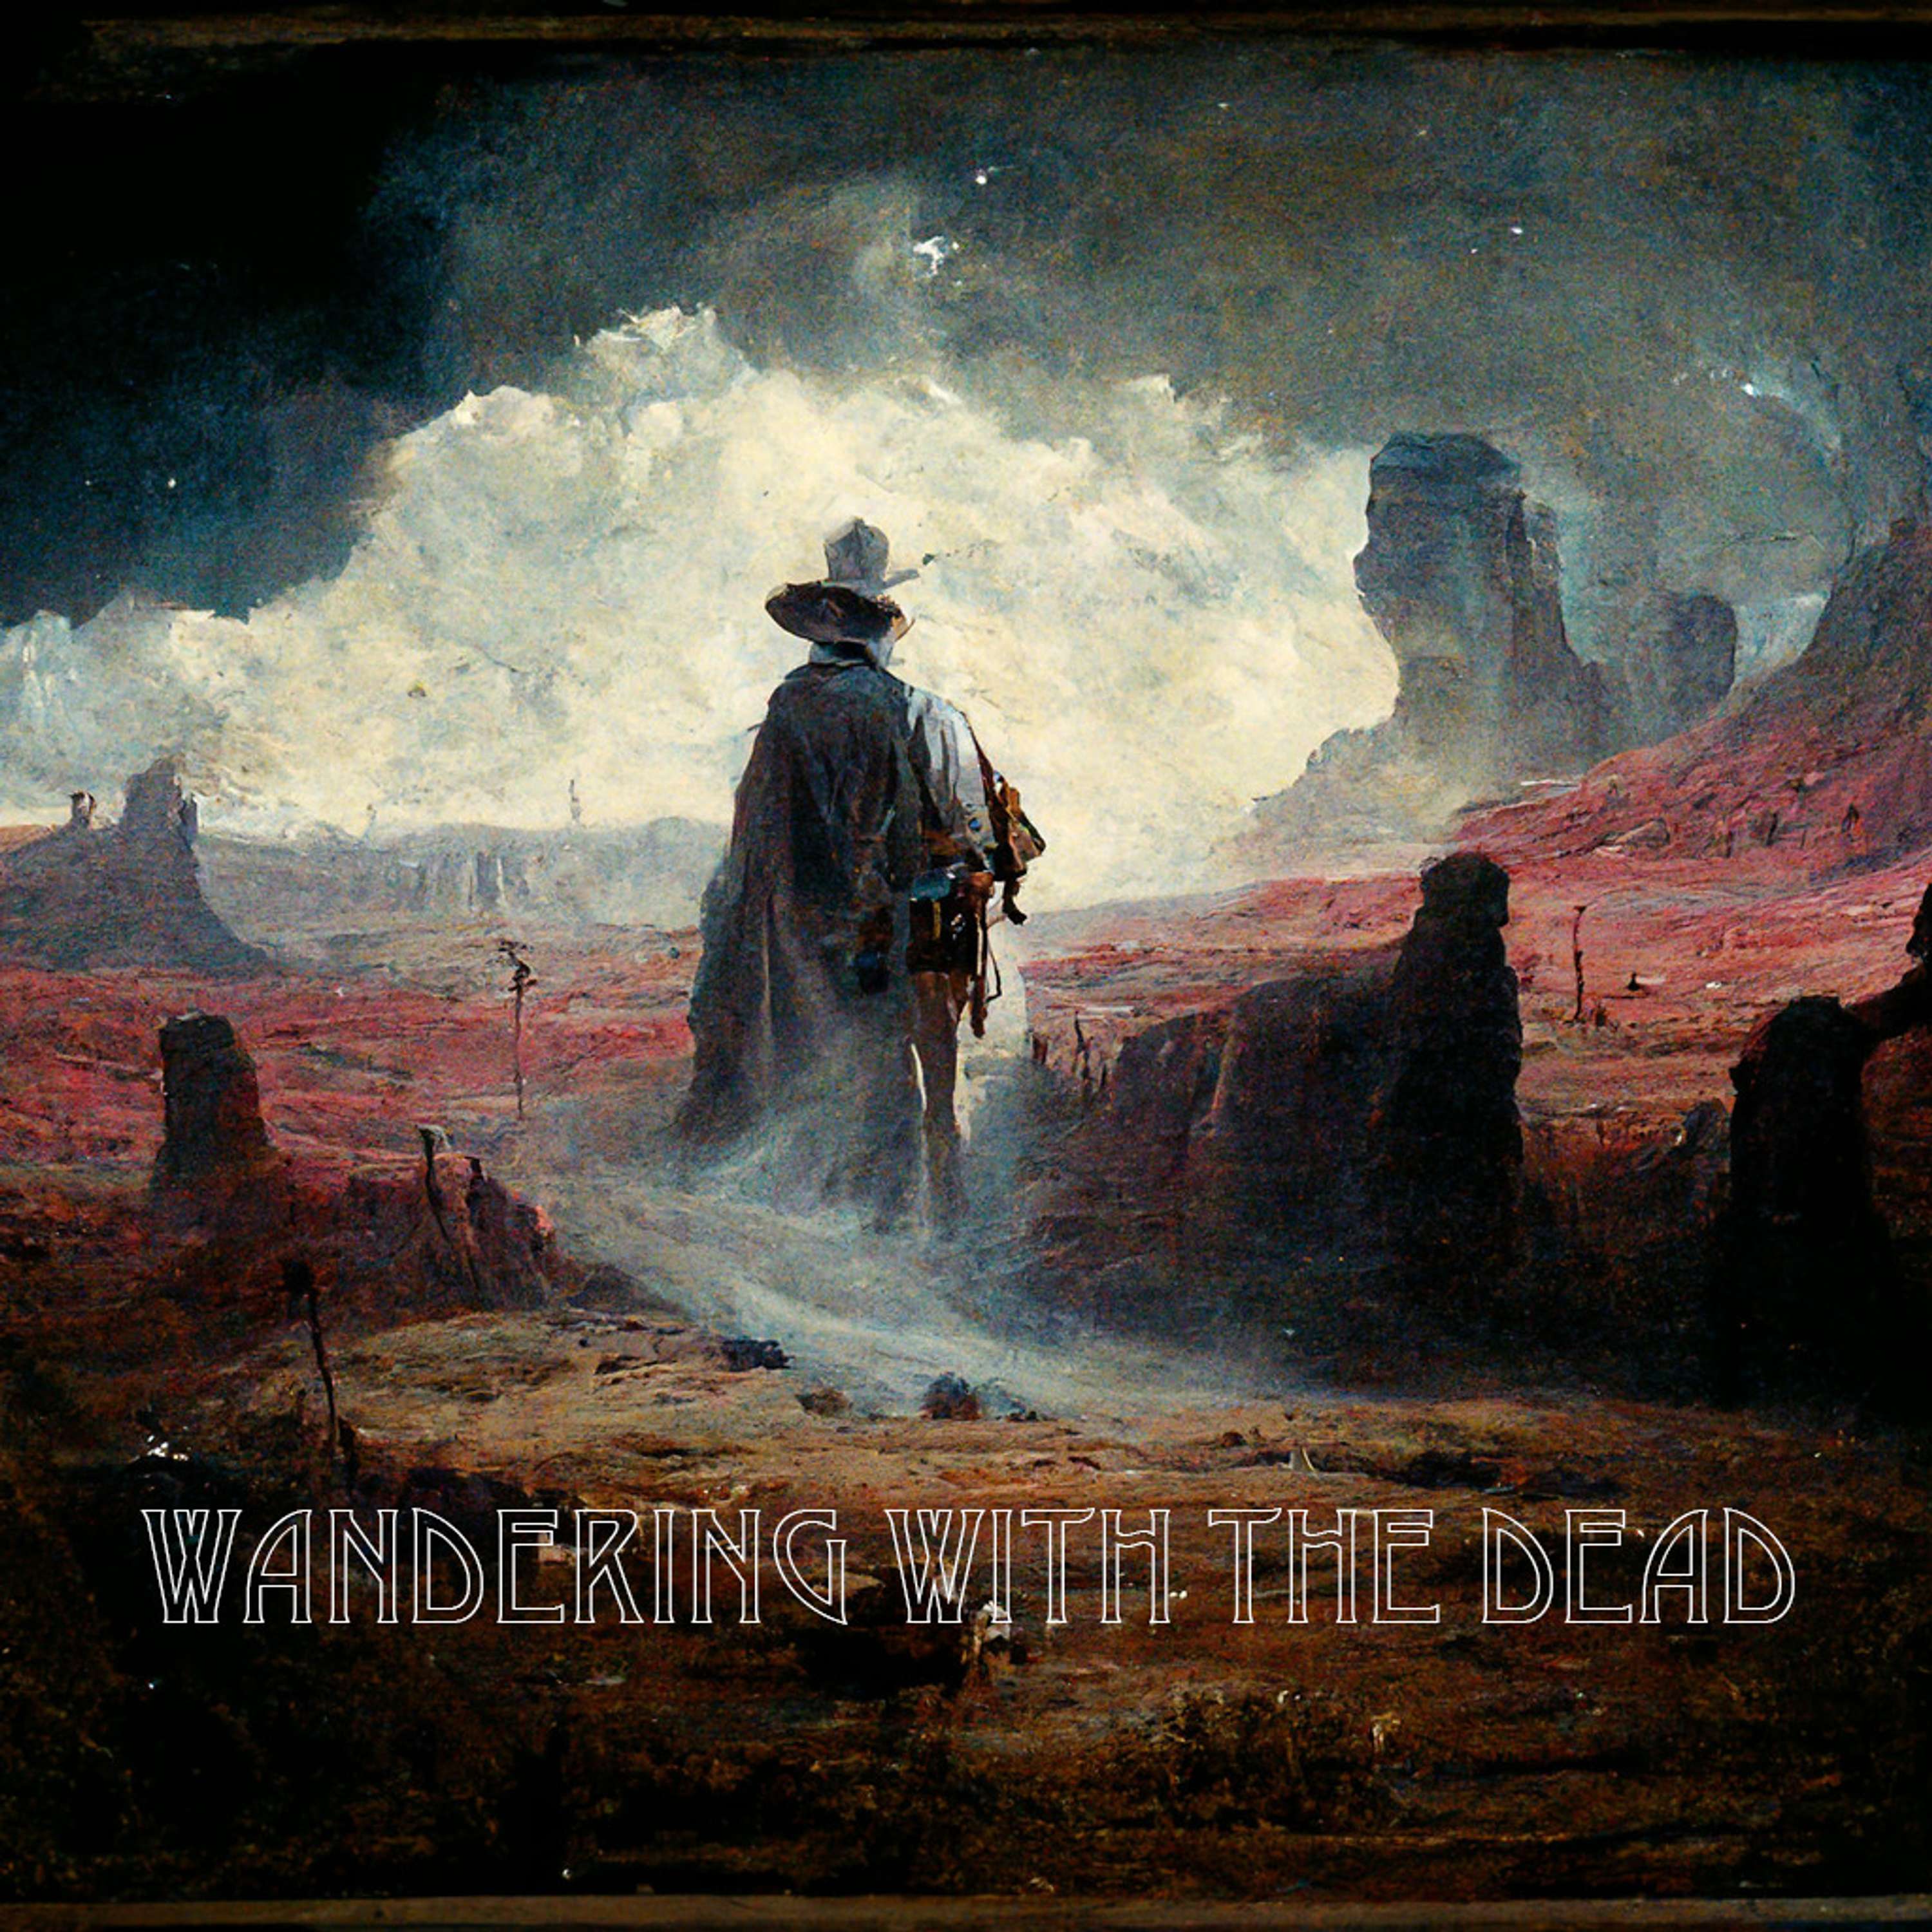 Wandering with the Dead podcast show image